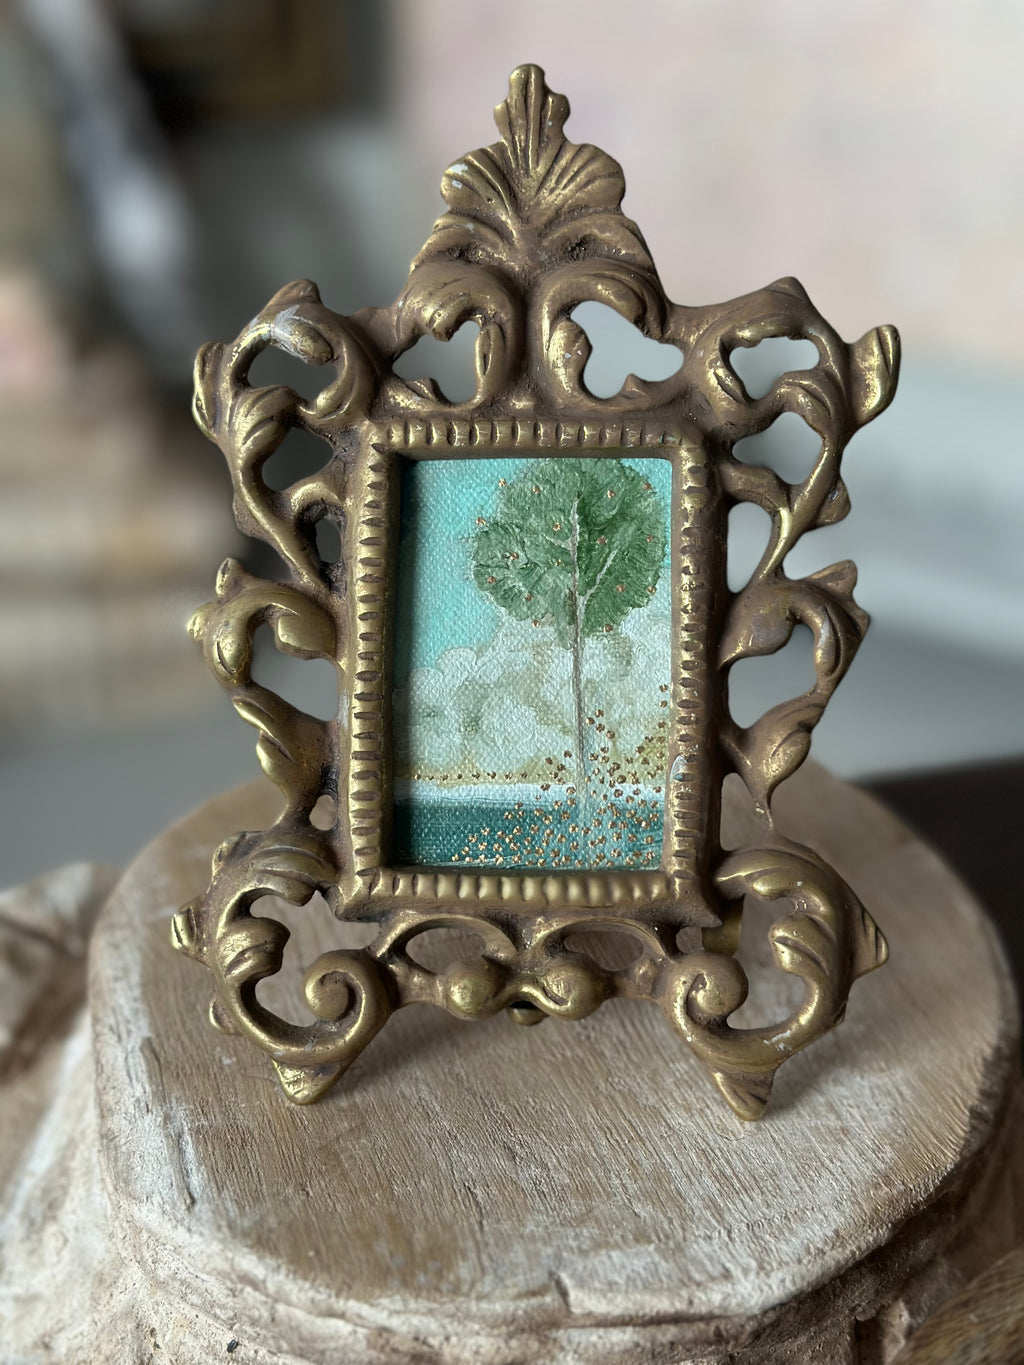 "Stand Tall" Miniature oil painting in rare ornate metal frame